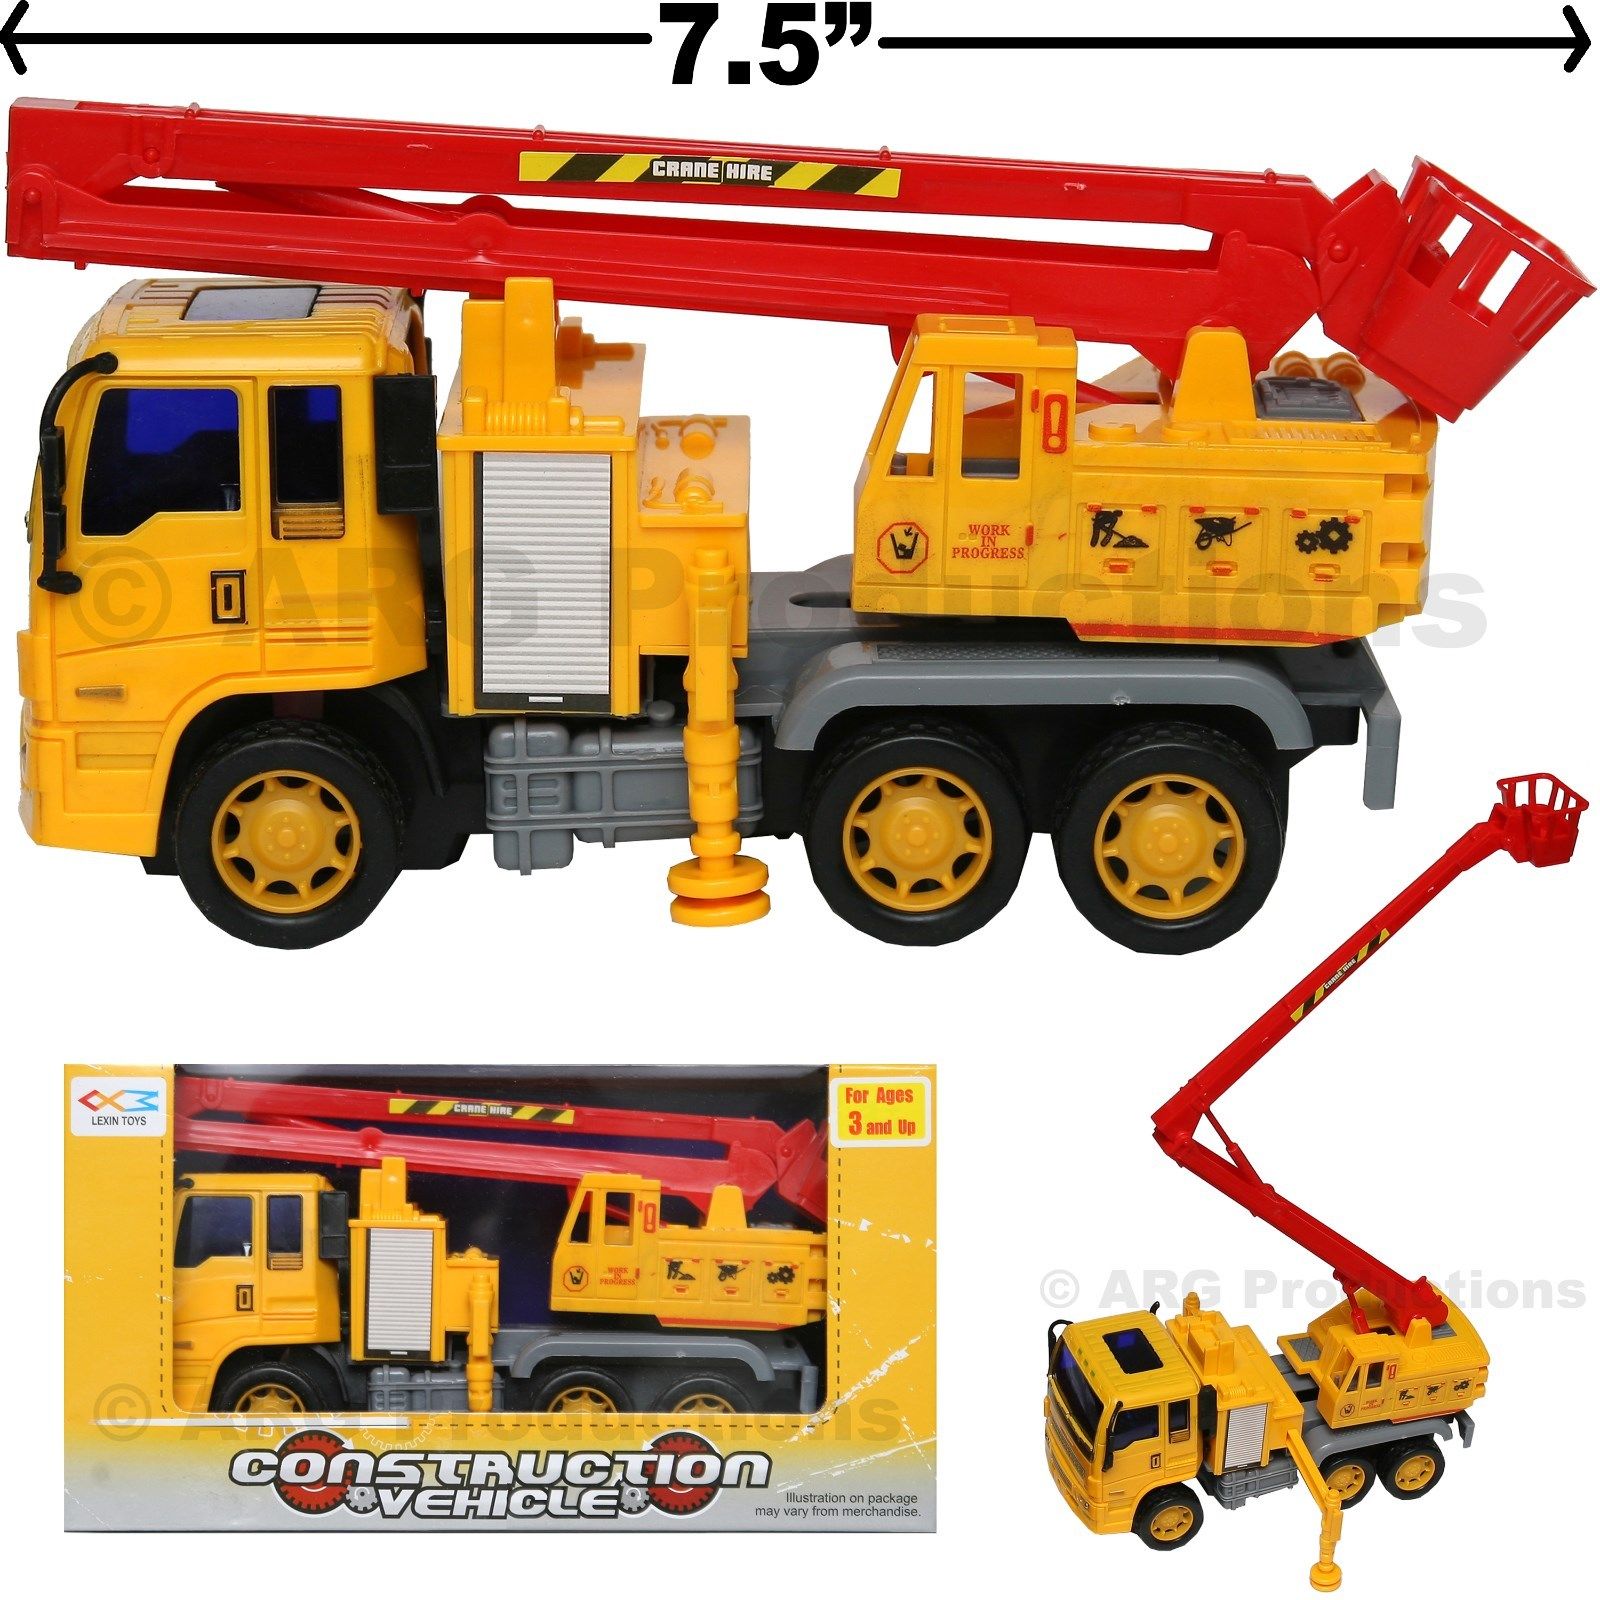 Dump Truck Toy Construction Vehicle Friction Powered Kids Love Them ...